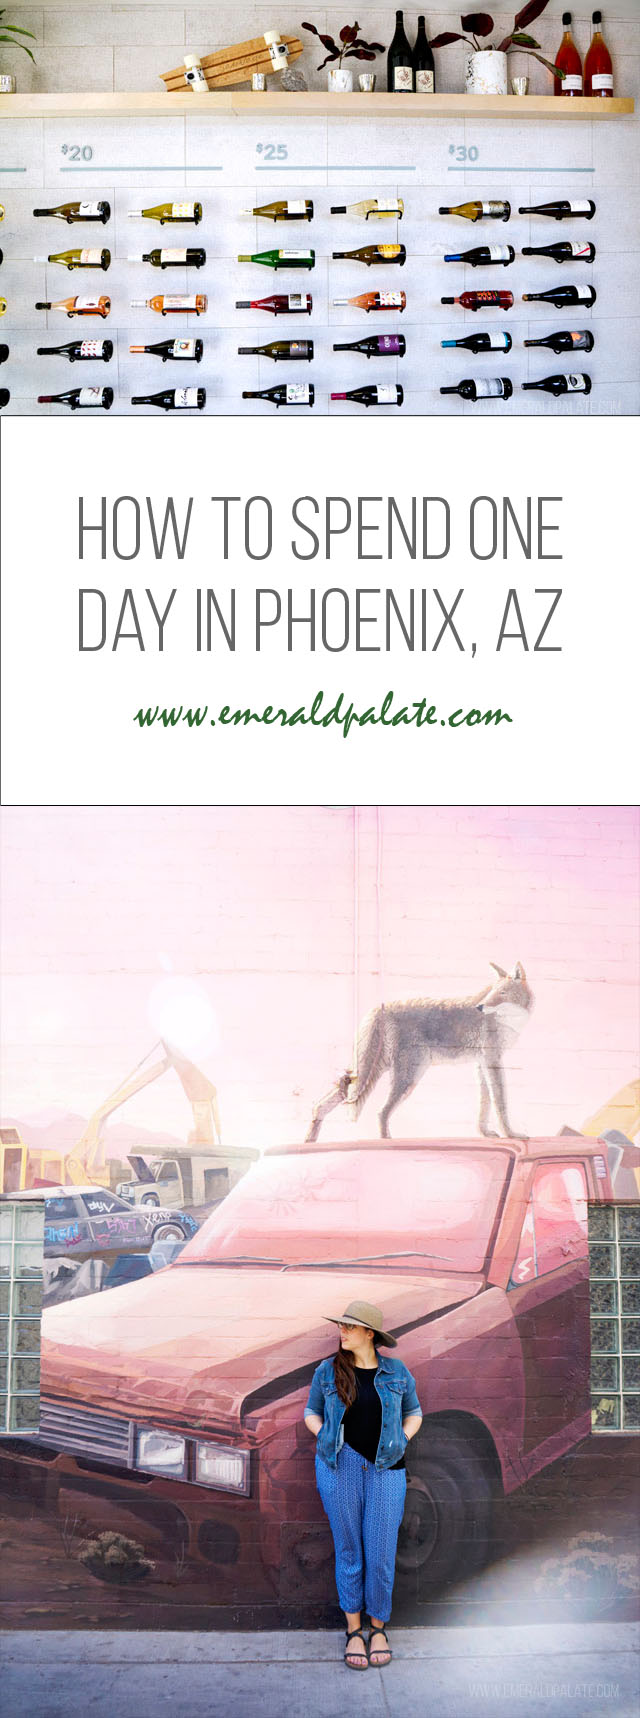 Wondering what to do in downtown Phoenix? Here's your ultimate list of how to spend one day in Phoenix, including where to stay in Phoenix, fun places to eat in Phoenix, and unique restaurants!